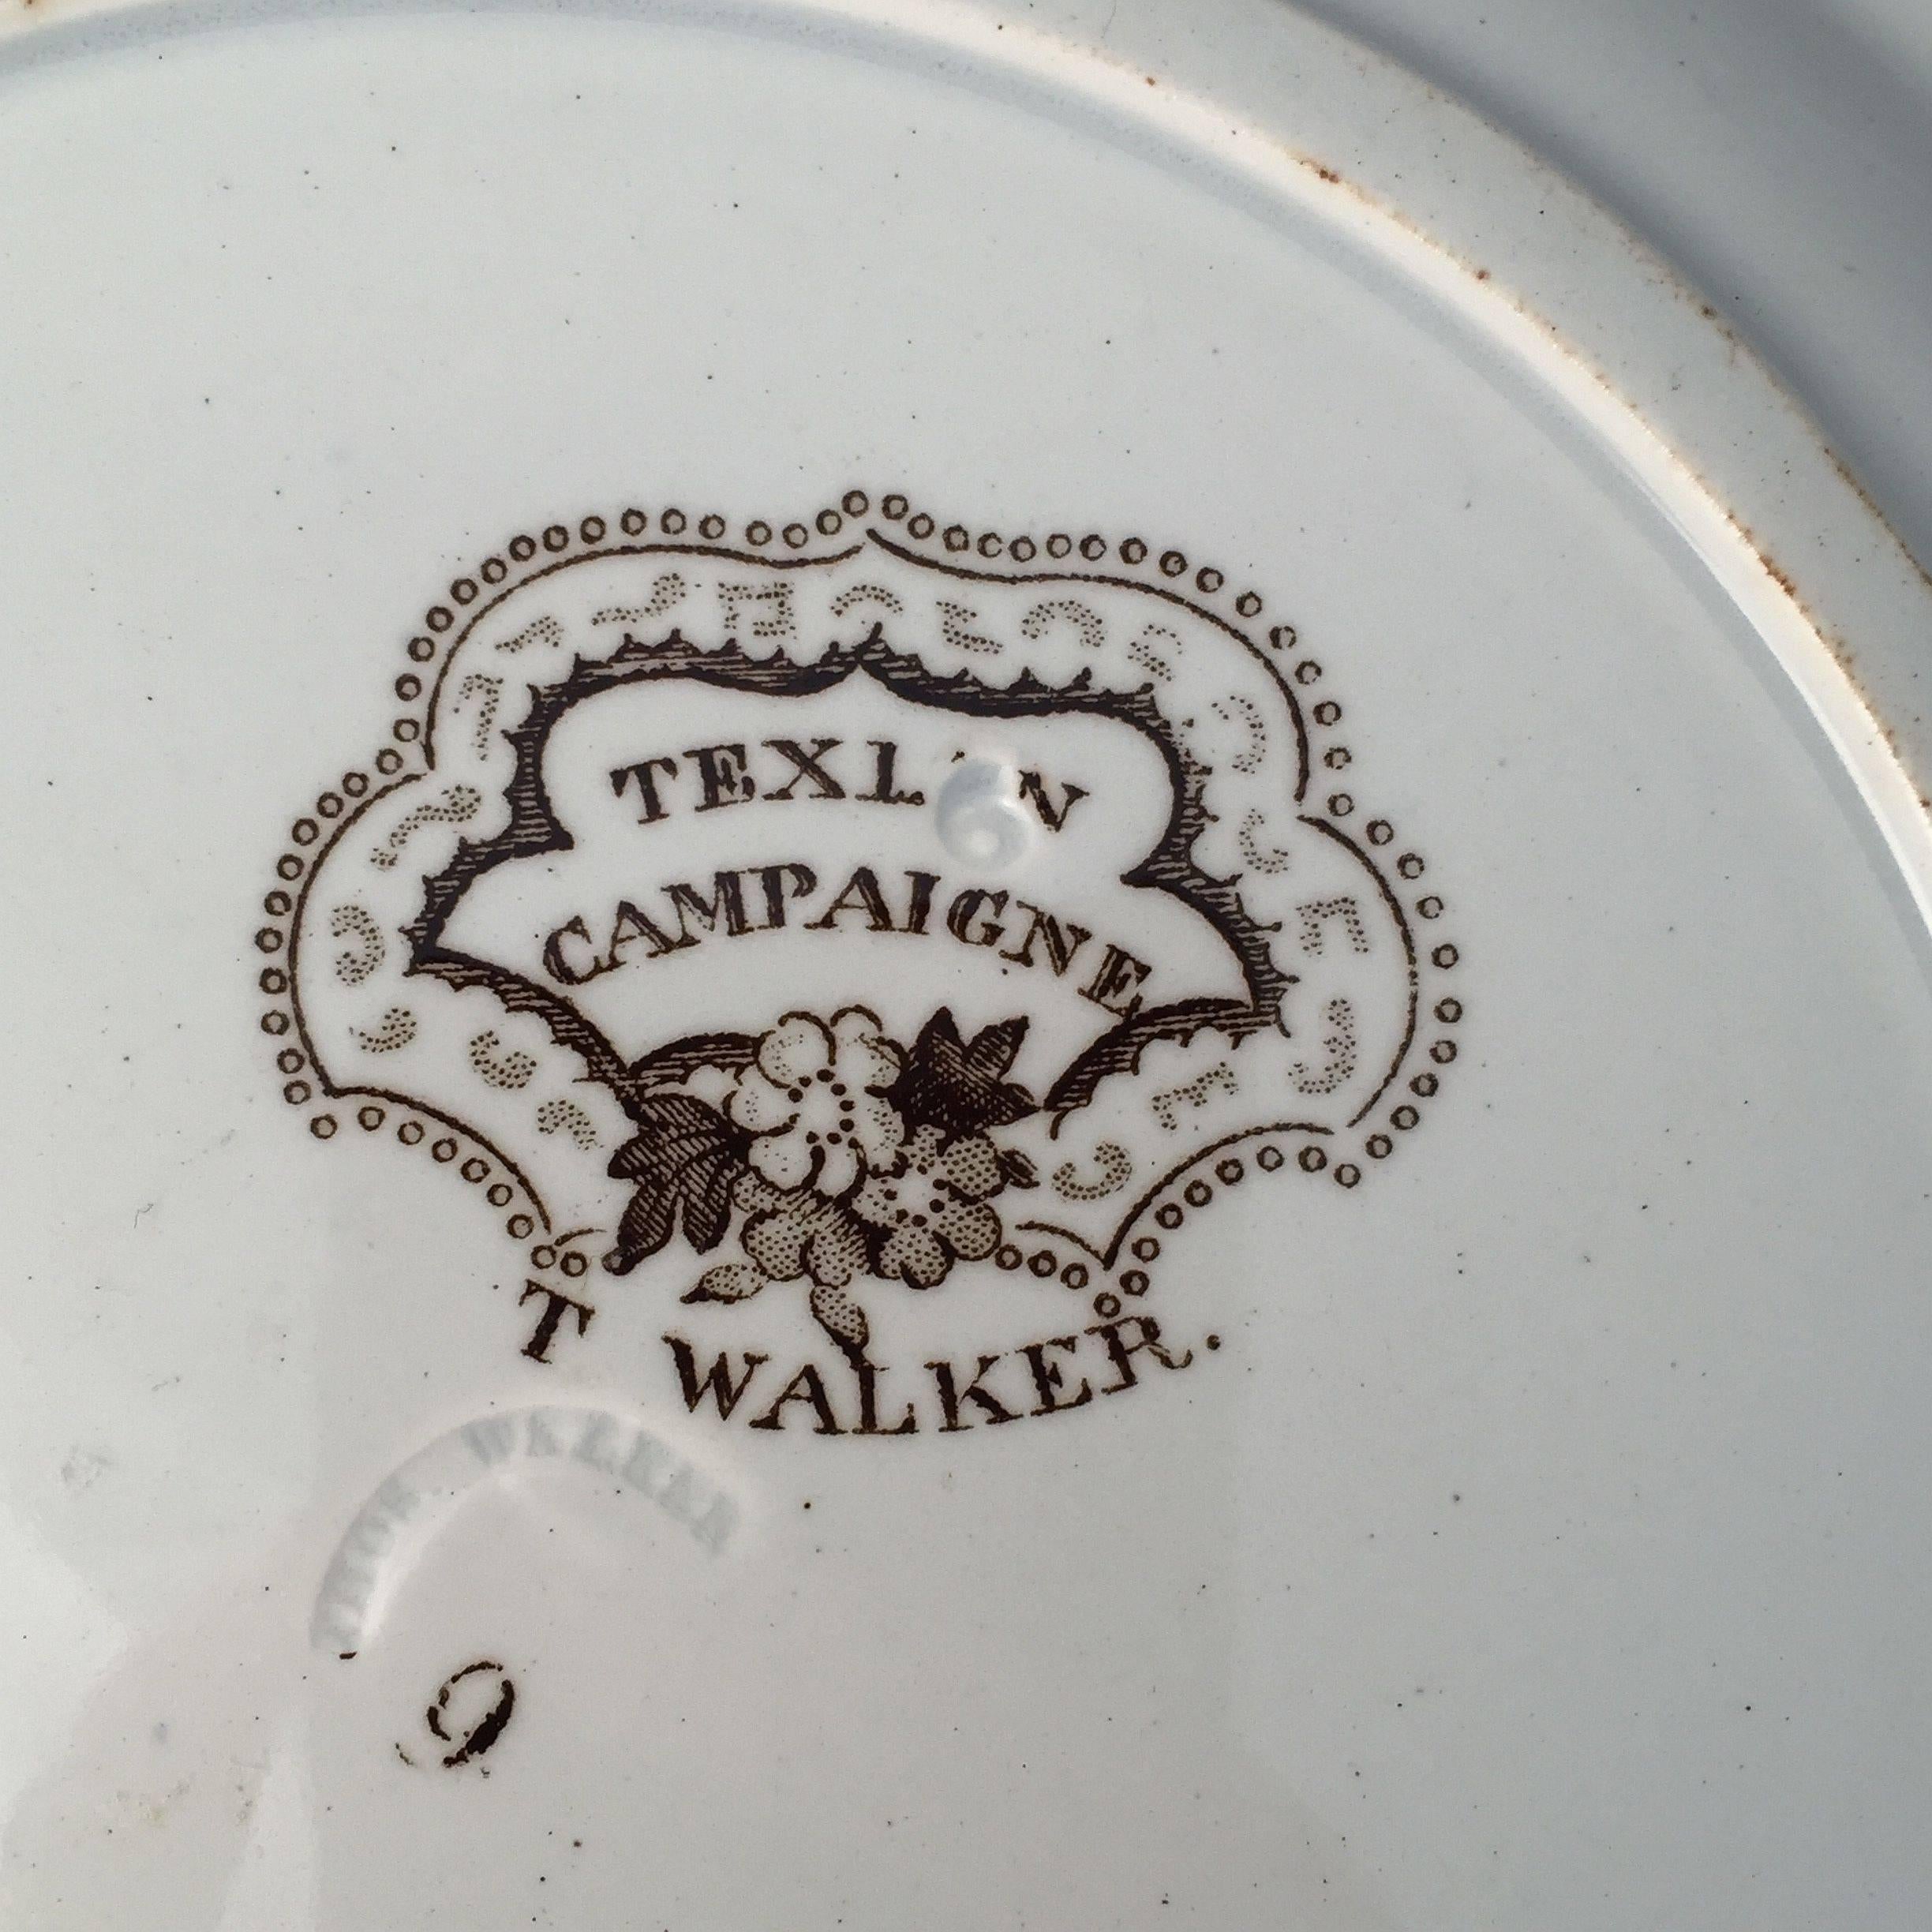 English Brown and White Plate, 'Texian Campaigne' by Thomas Walker 1